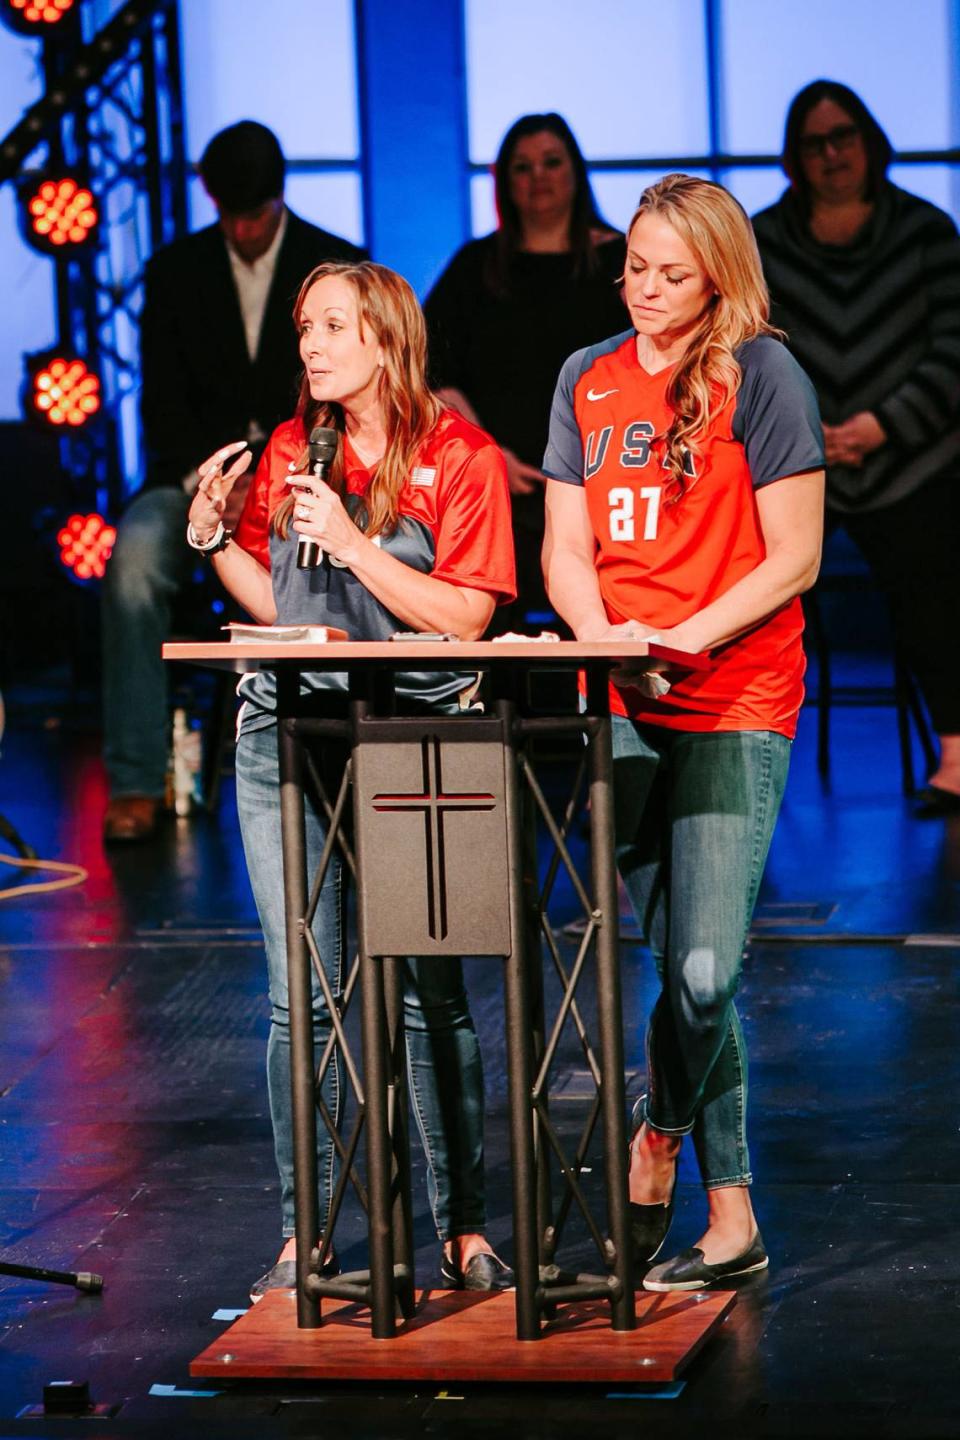 Two Olympic gold medalists in softball for Team USA spoke at Mia Stokes’ funeral on Feb. 14, 2020. They were Leah O’Brien-Amico (left) and Jennie Finch, who each knew the Stokes family due to summer softball camps Mia and Mallory Stokes had attended.